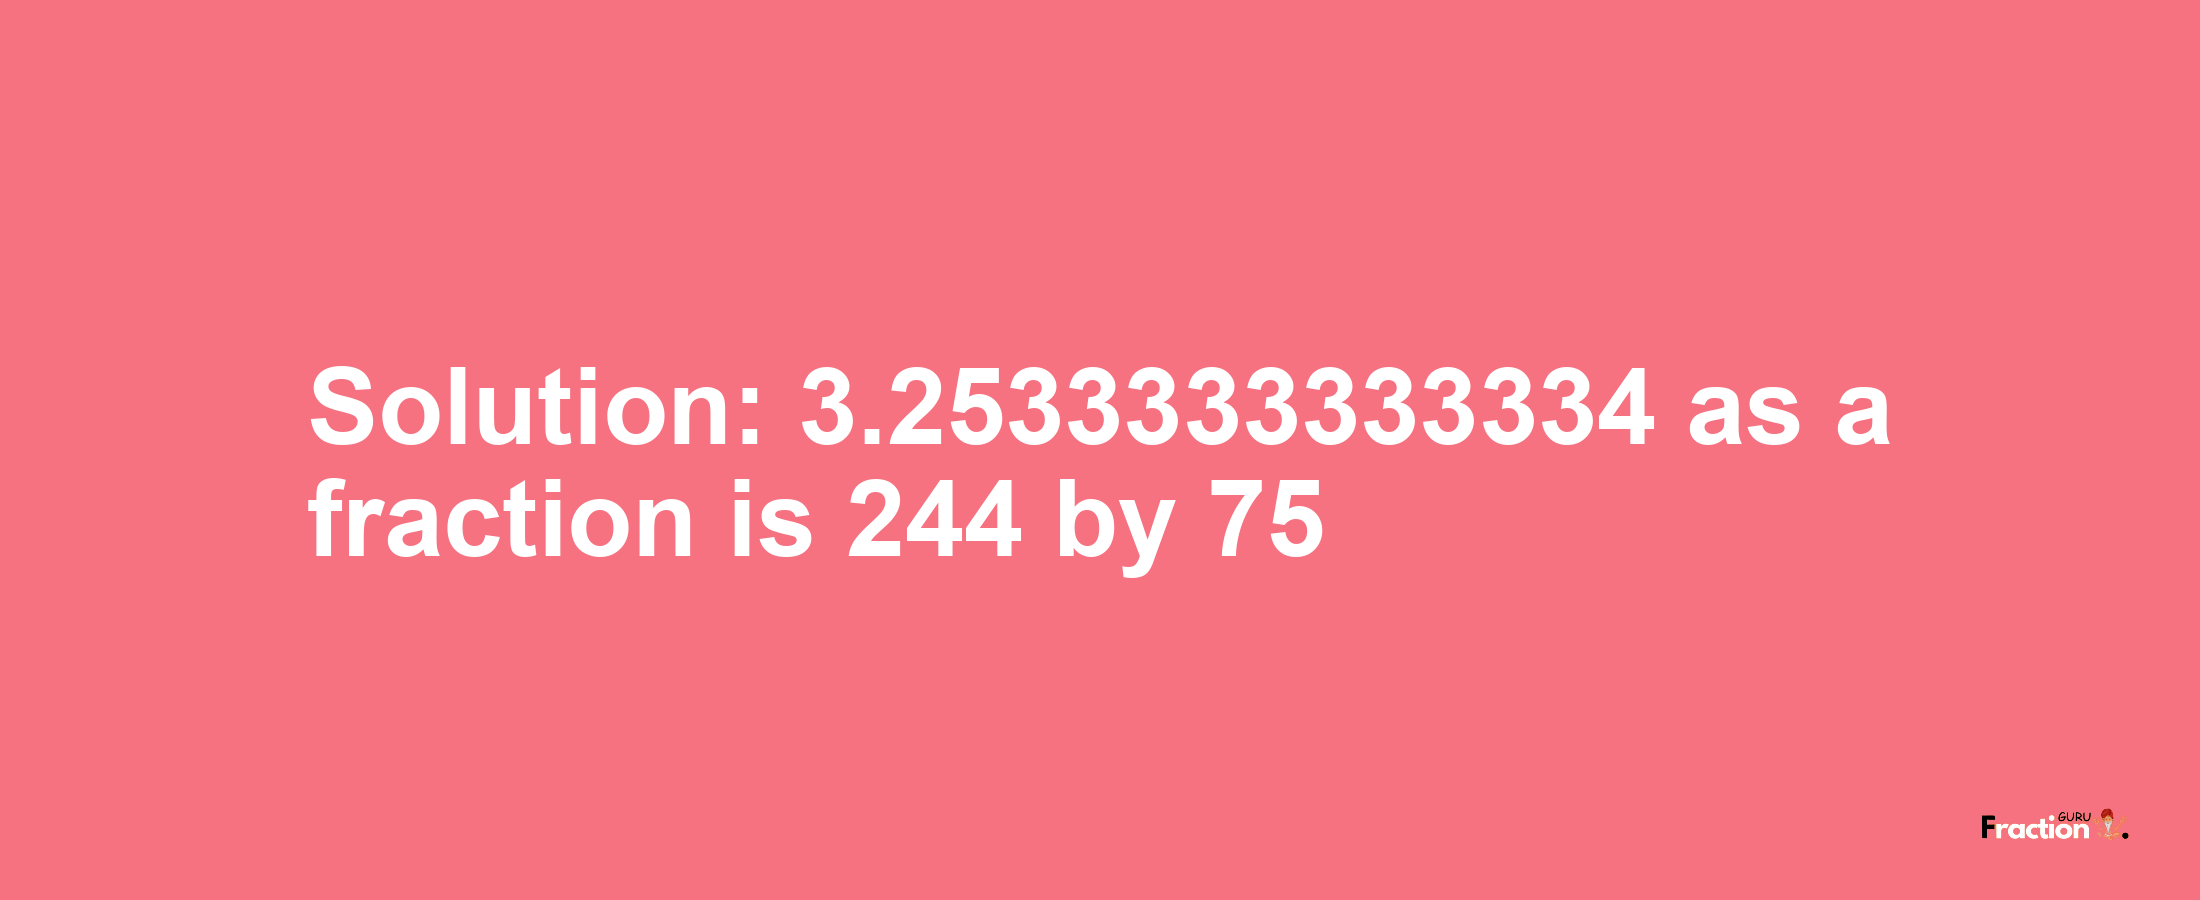 Solution:3.2533333333334 as a fraction is 244/75